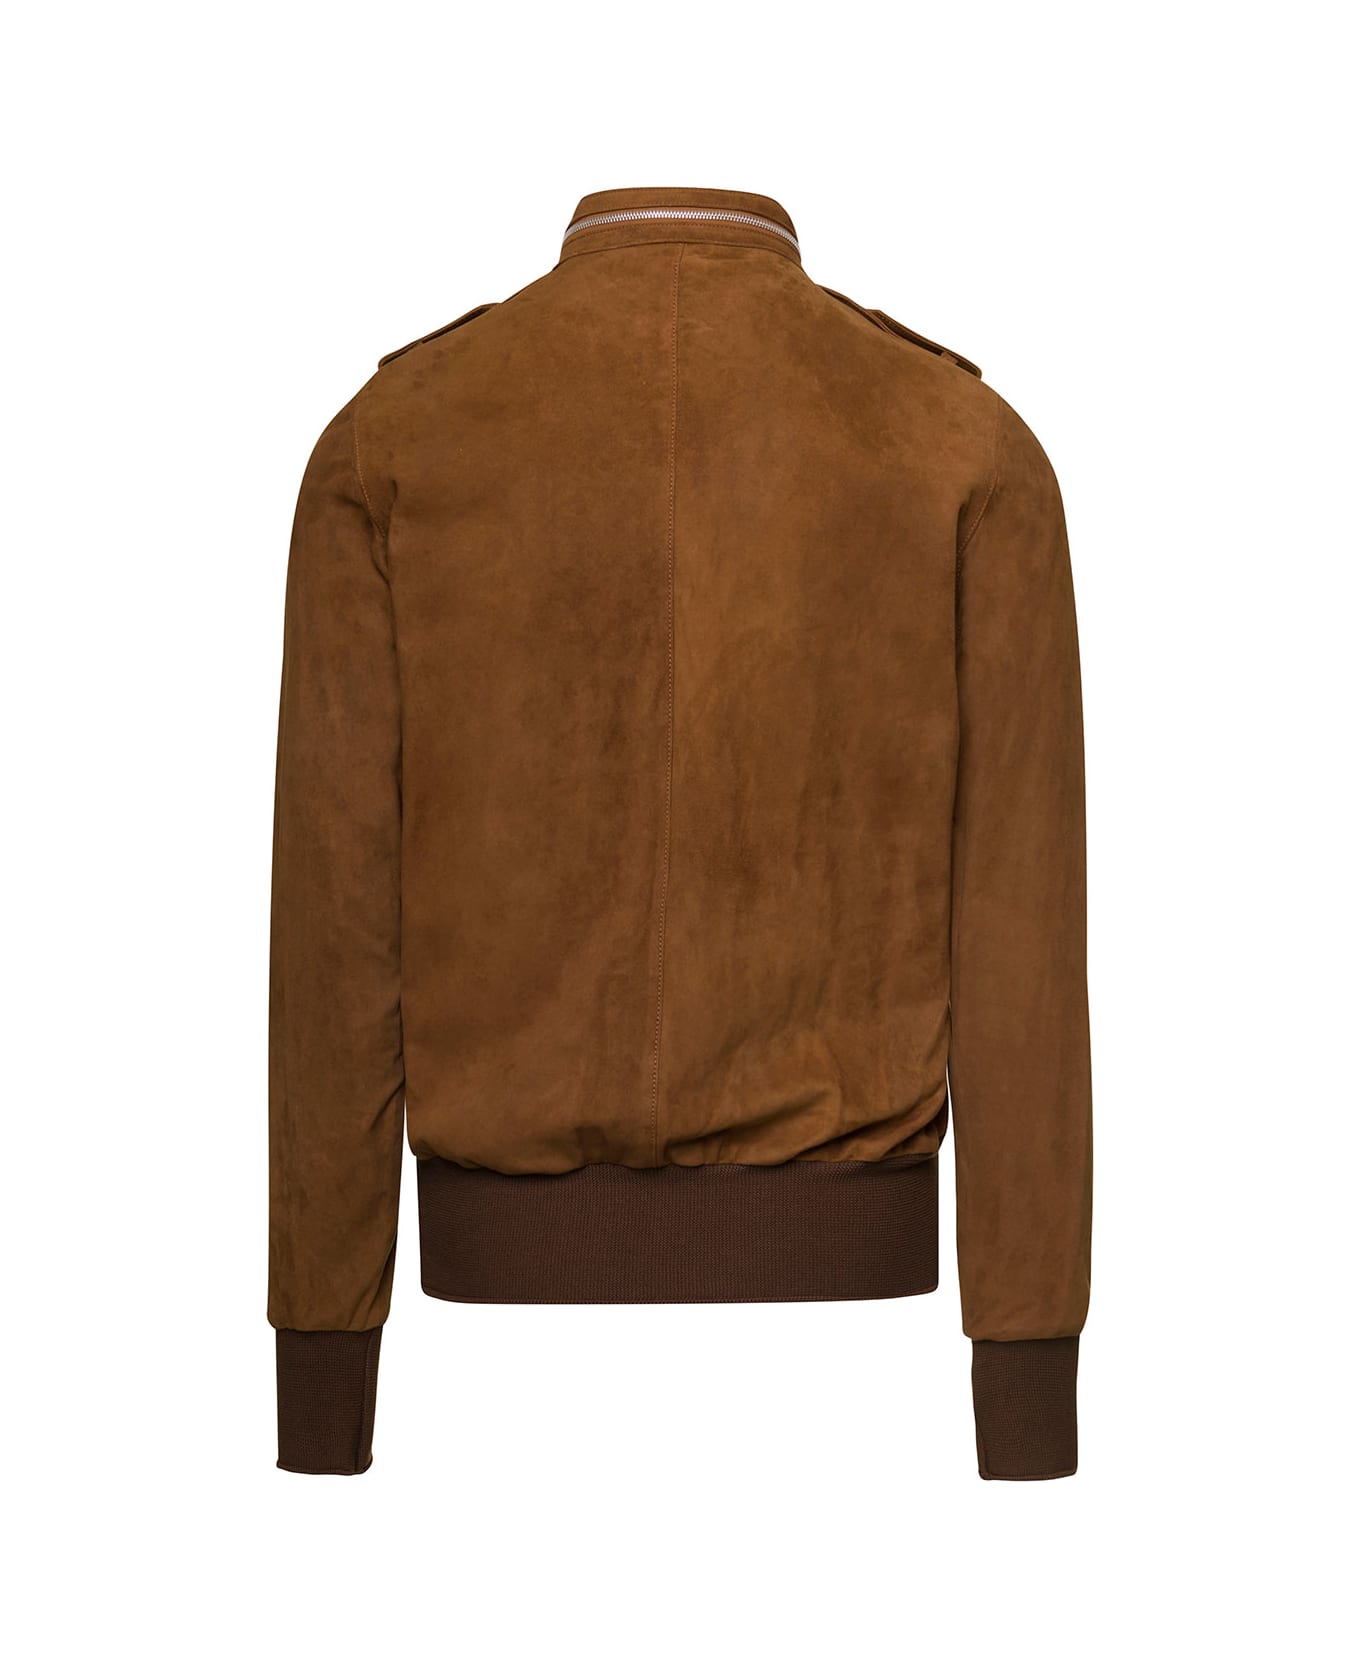 Giorgio Brato Brown Jacket With Zip Details And Elasticated Inserts In Suede Man - Brown